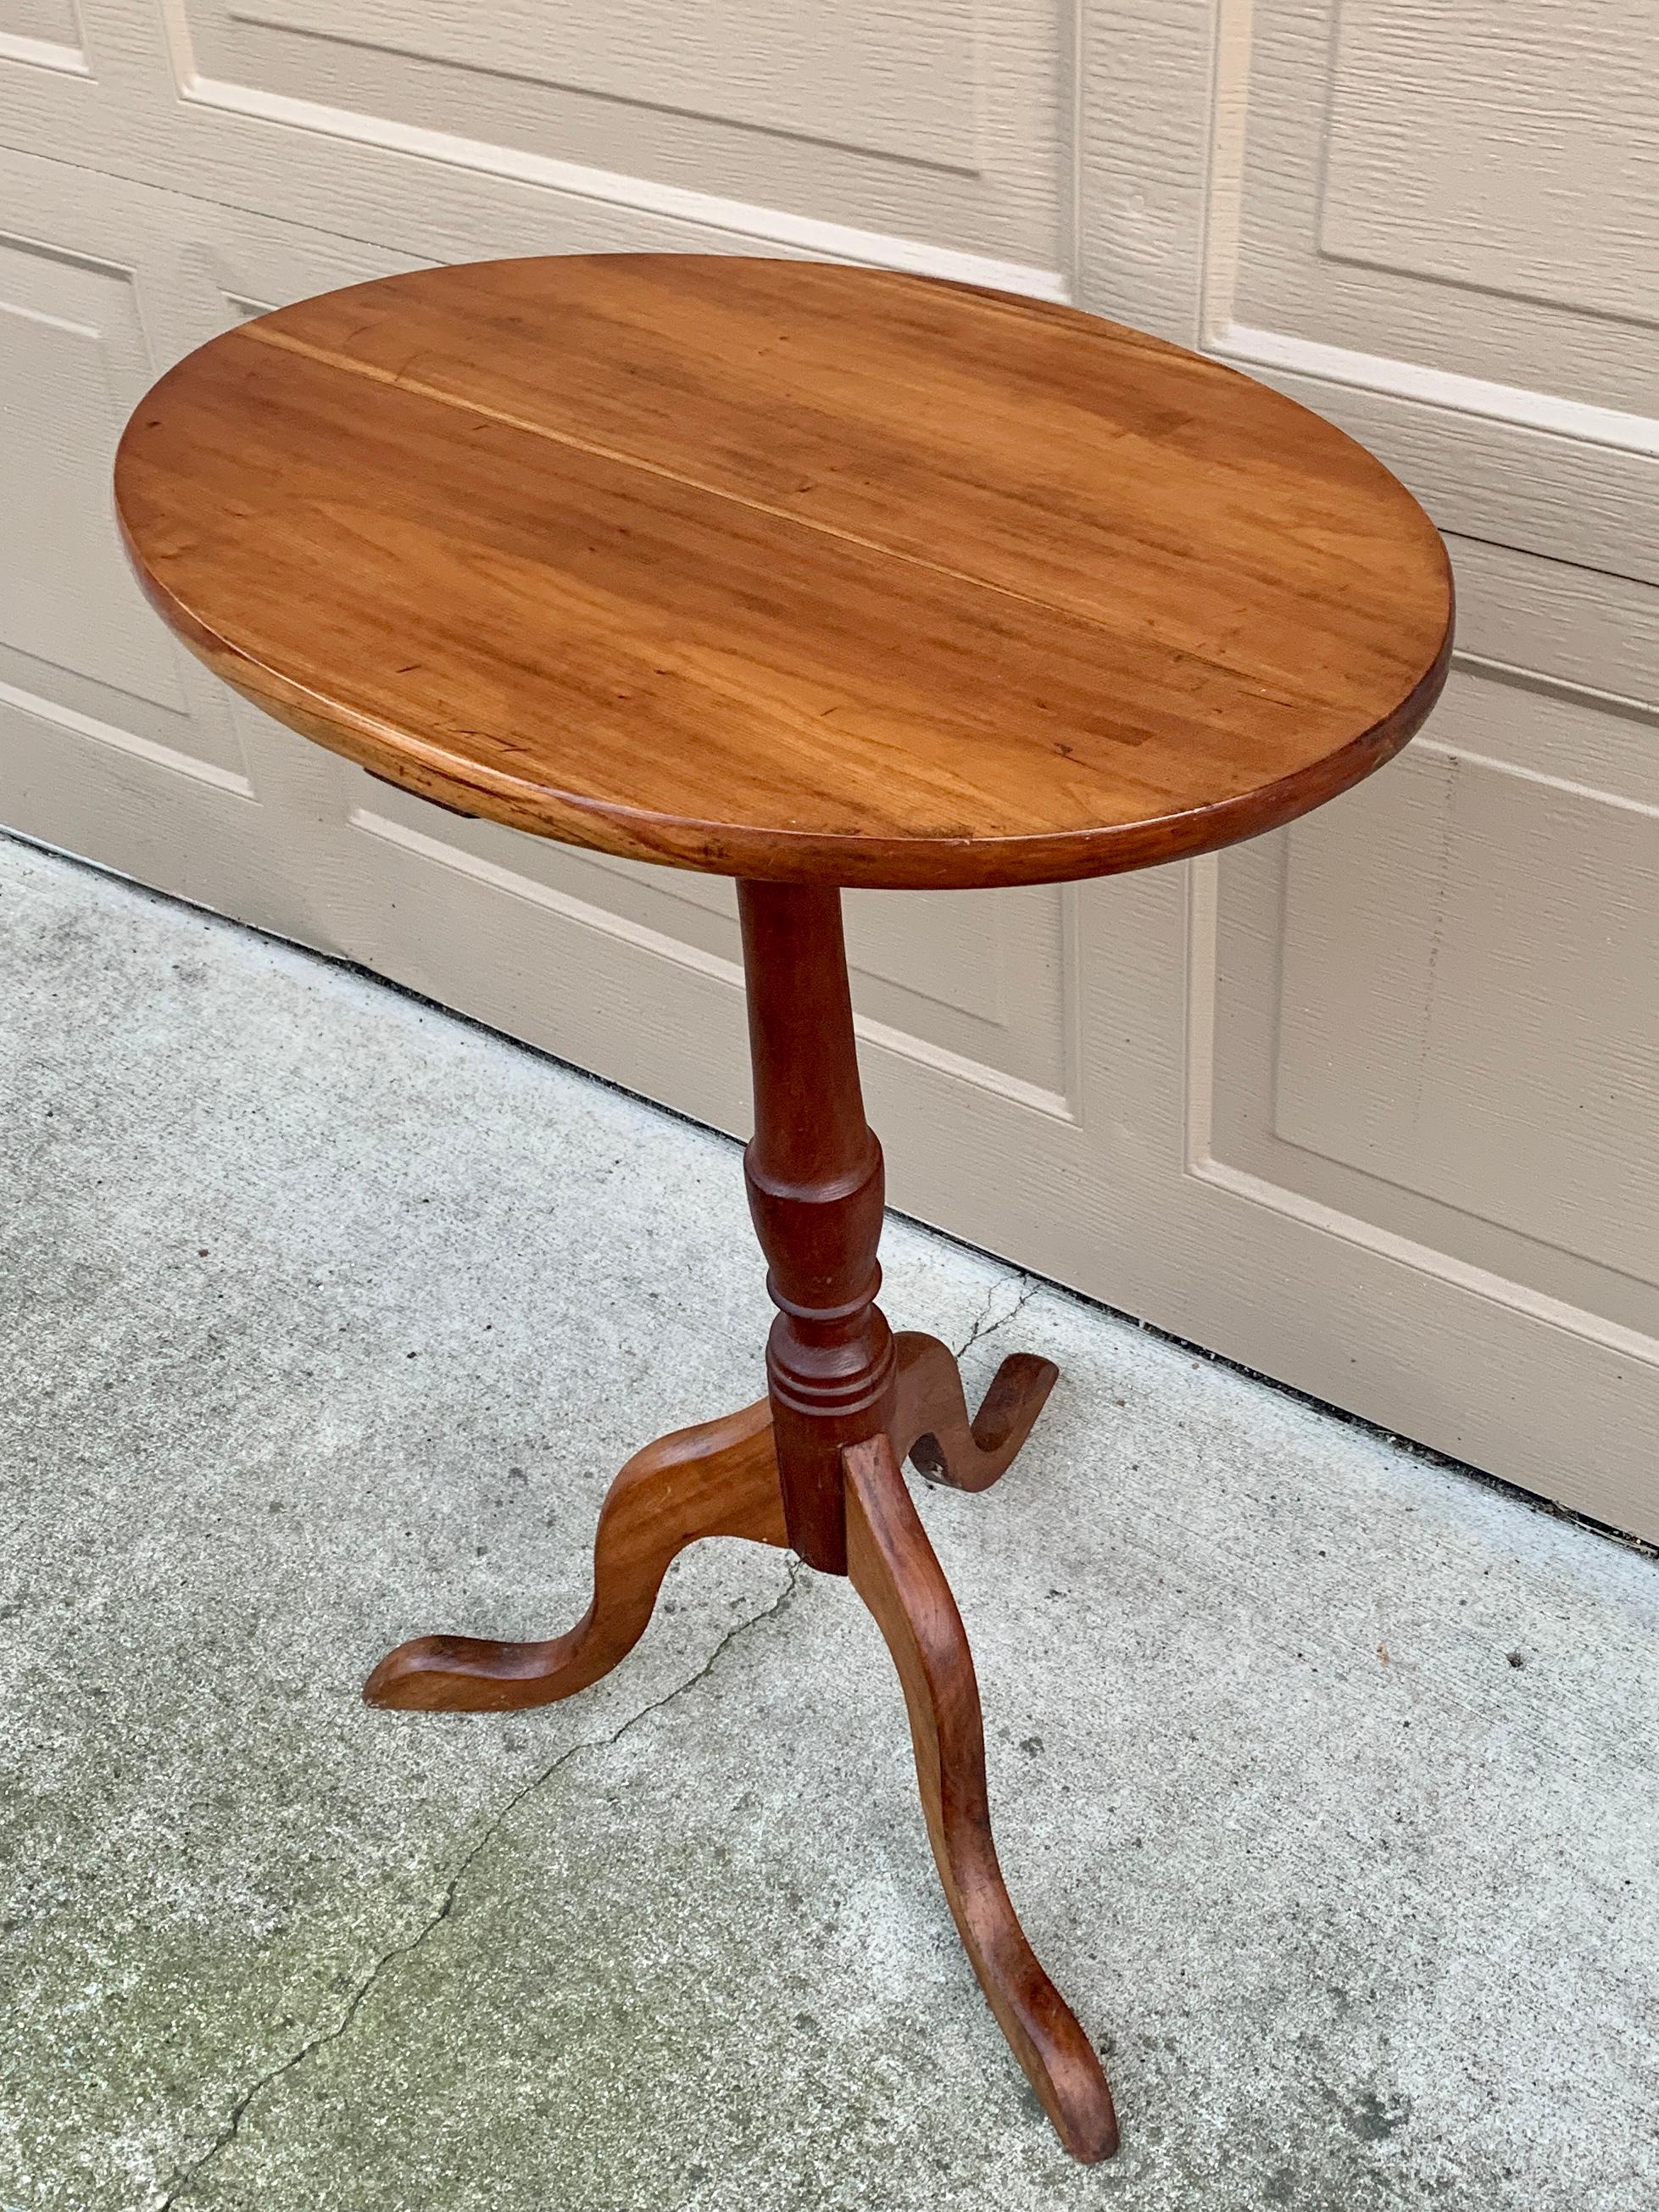 Queen Anne Antique American Colonial Cherry Candle Stand or Side Table, Mid 19th Century